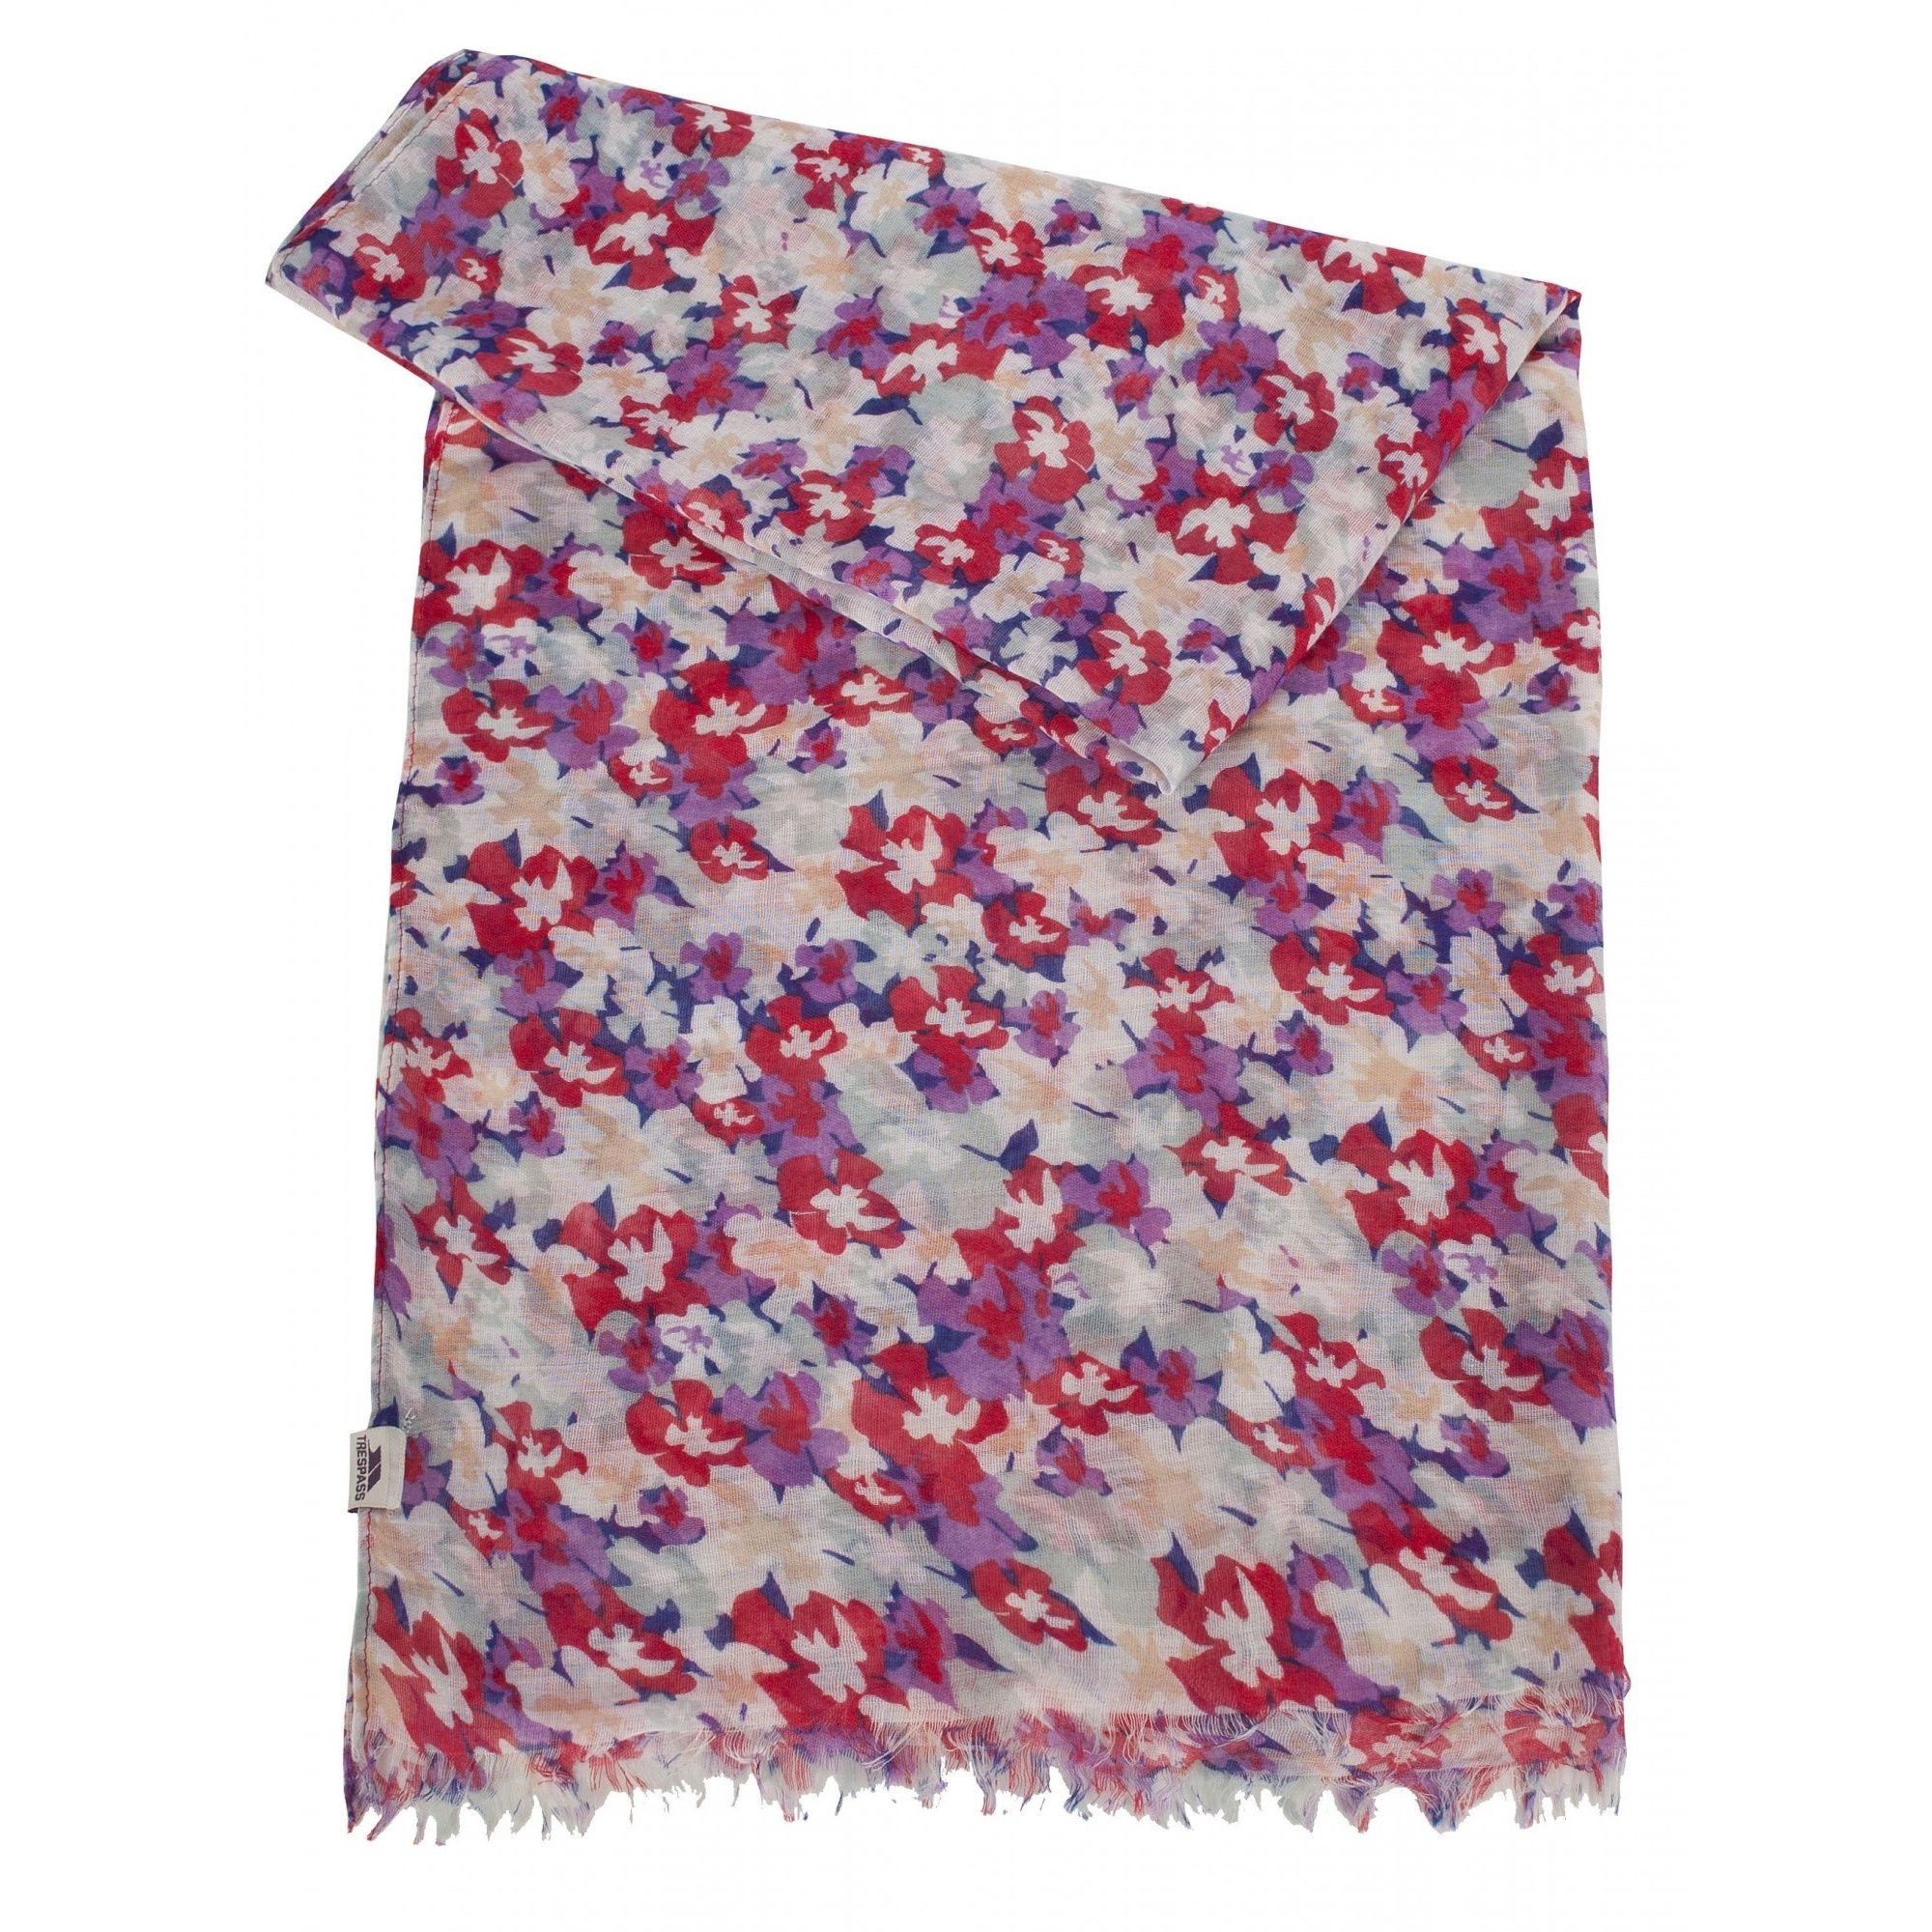 Womens woven scarf. Lightweight. All over floral print. Raw edge detail. Fabric: 100% polyester.